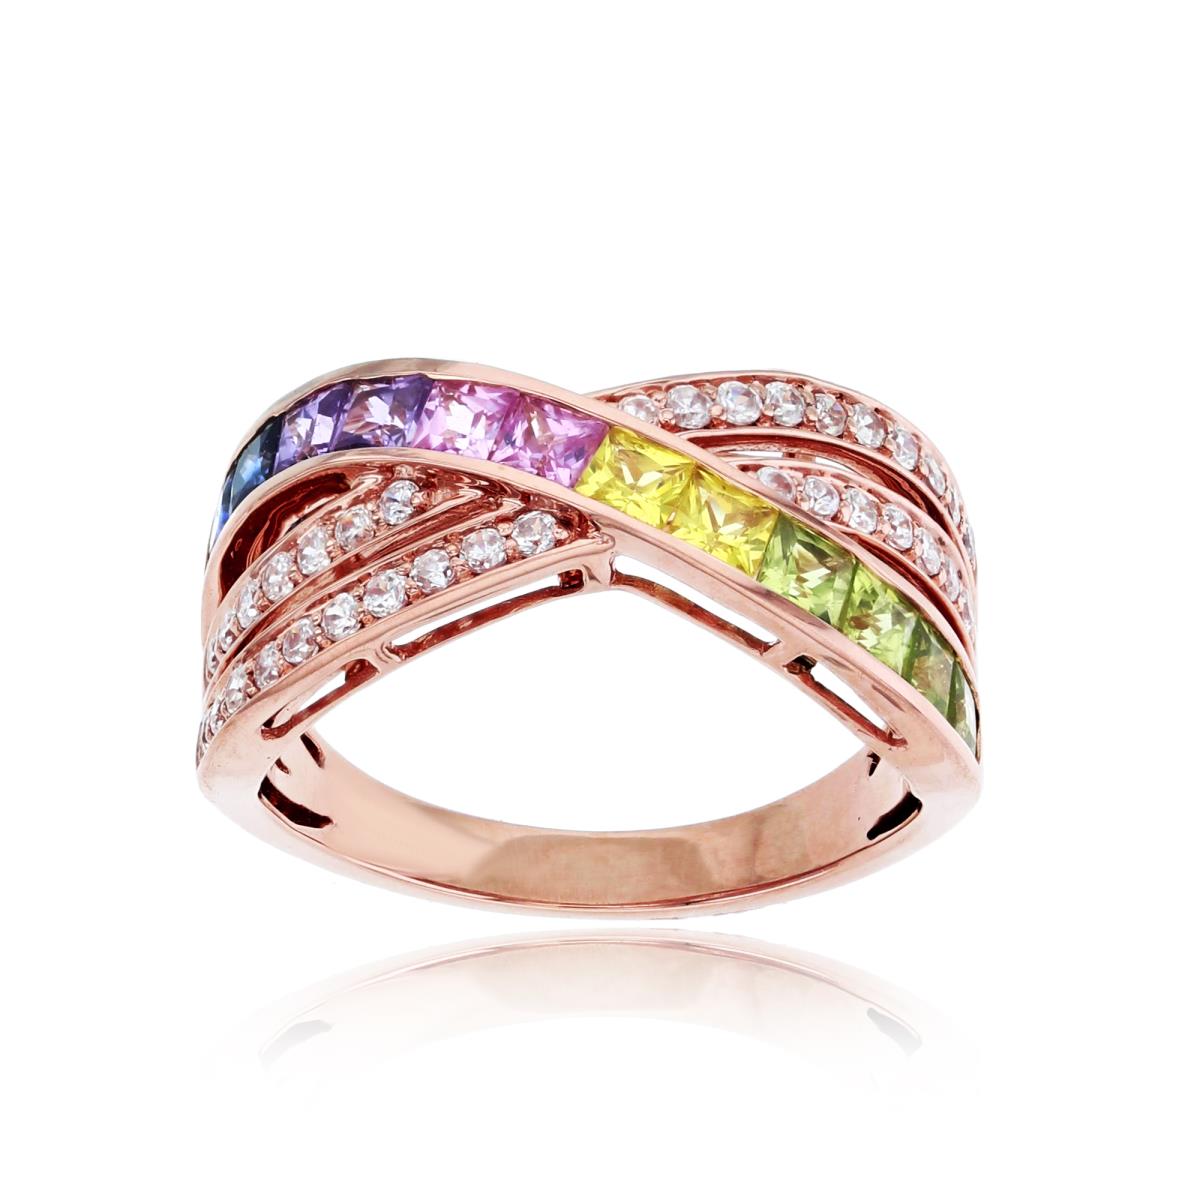 Sterling Silver Rose 1-Micron Rd White Sapphire & 2.5mm SQ Multicolor Criss/Cross Ring (Without backing)